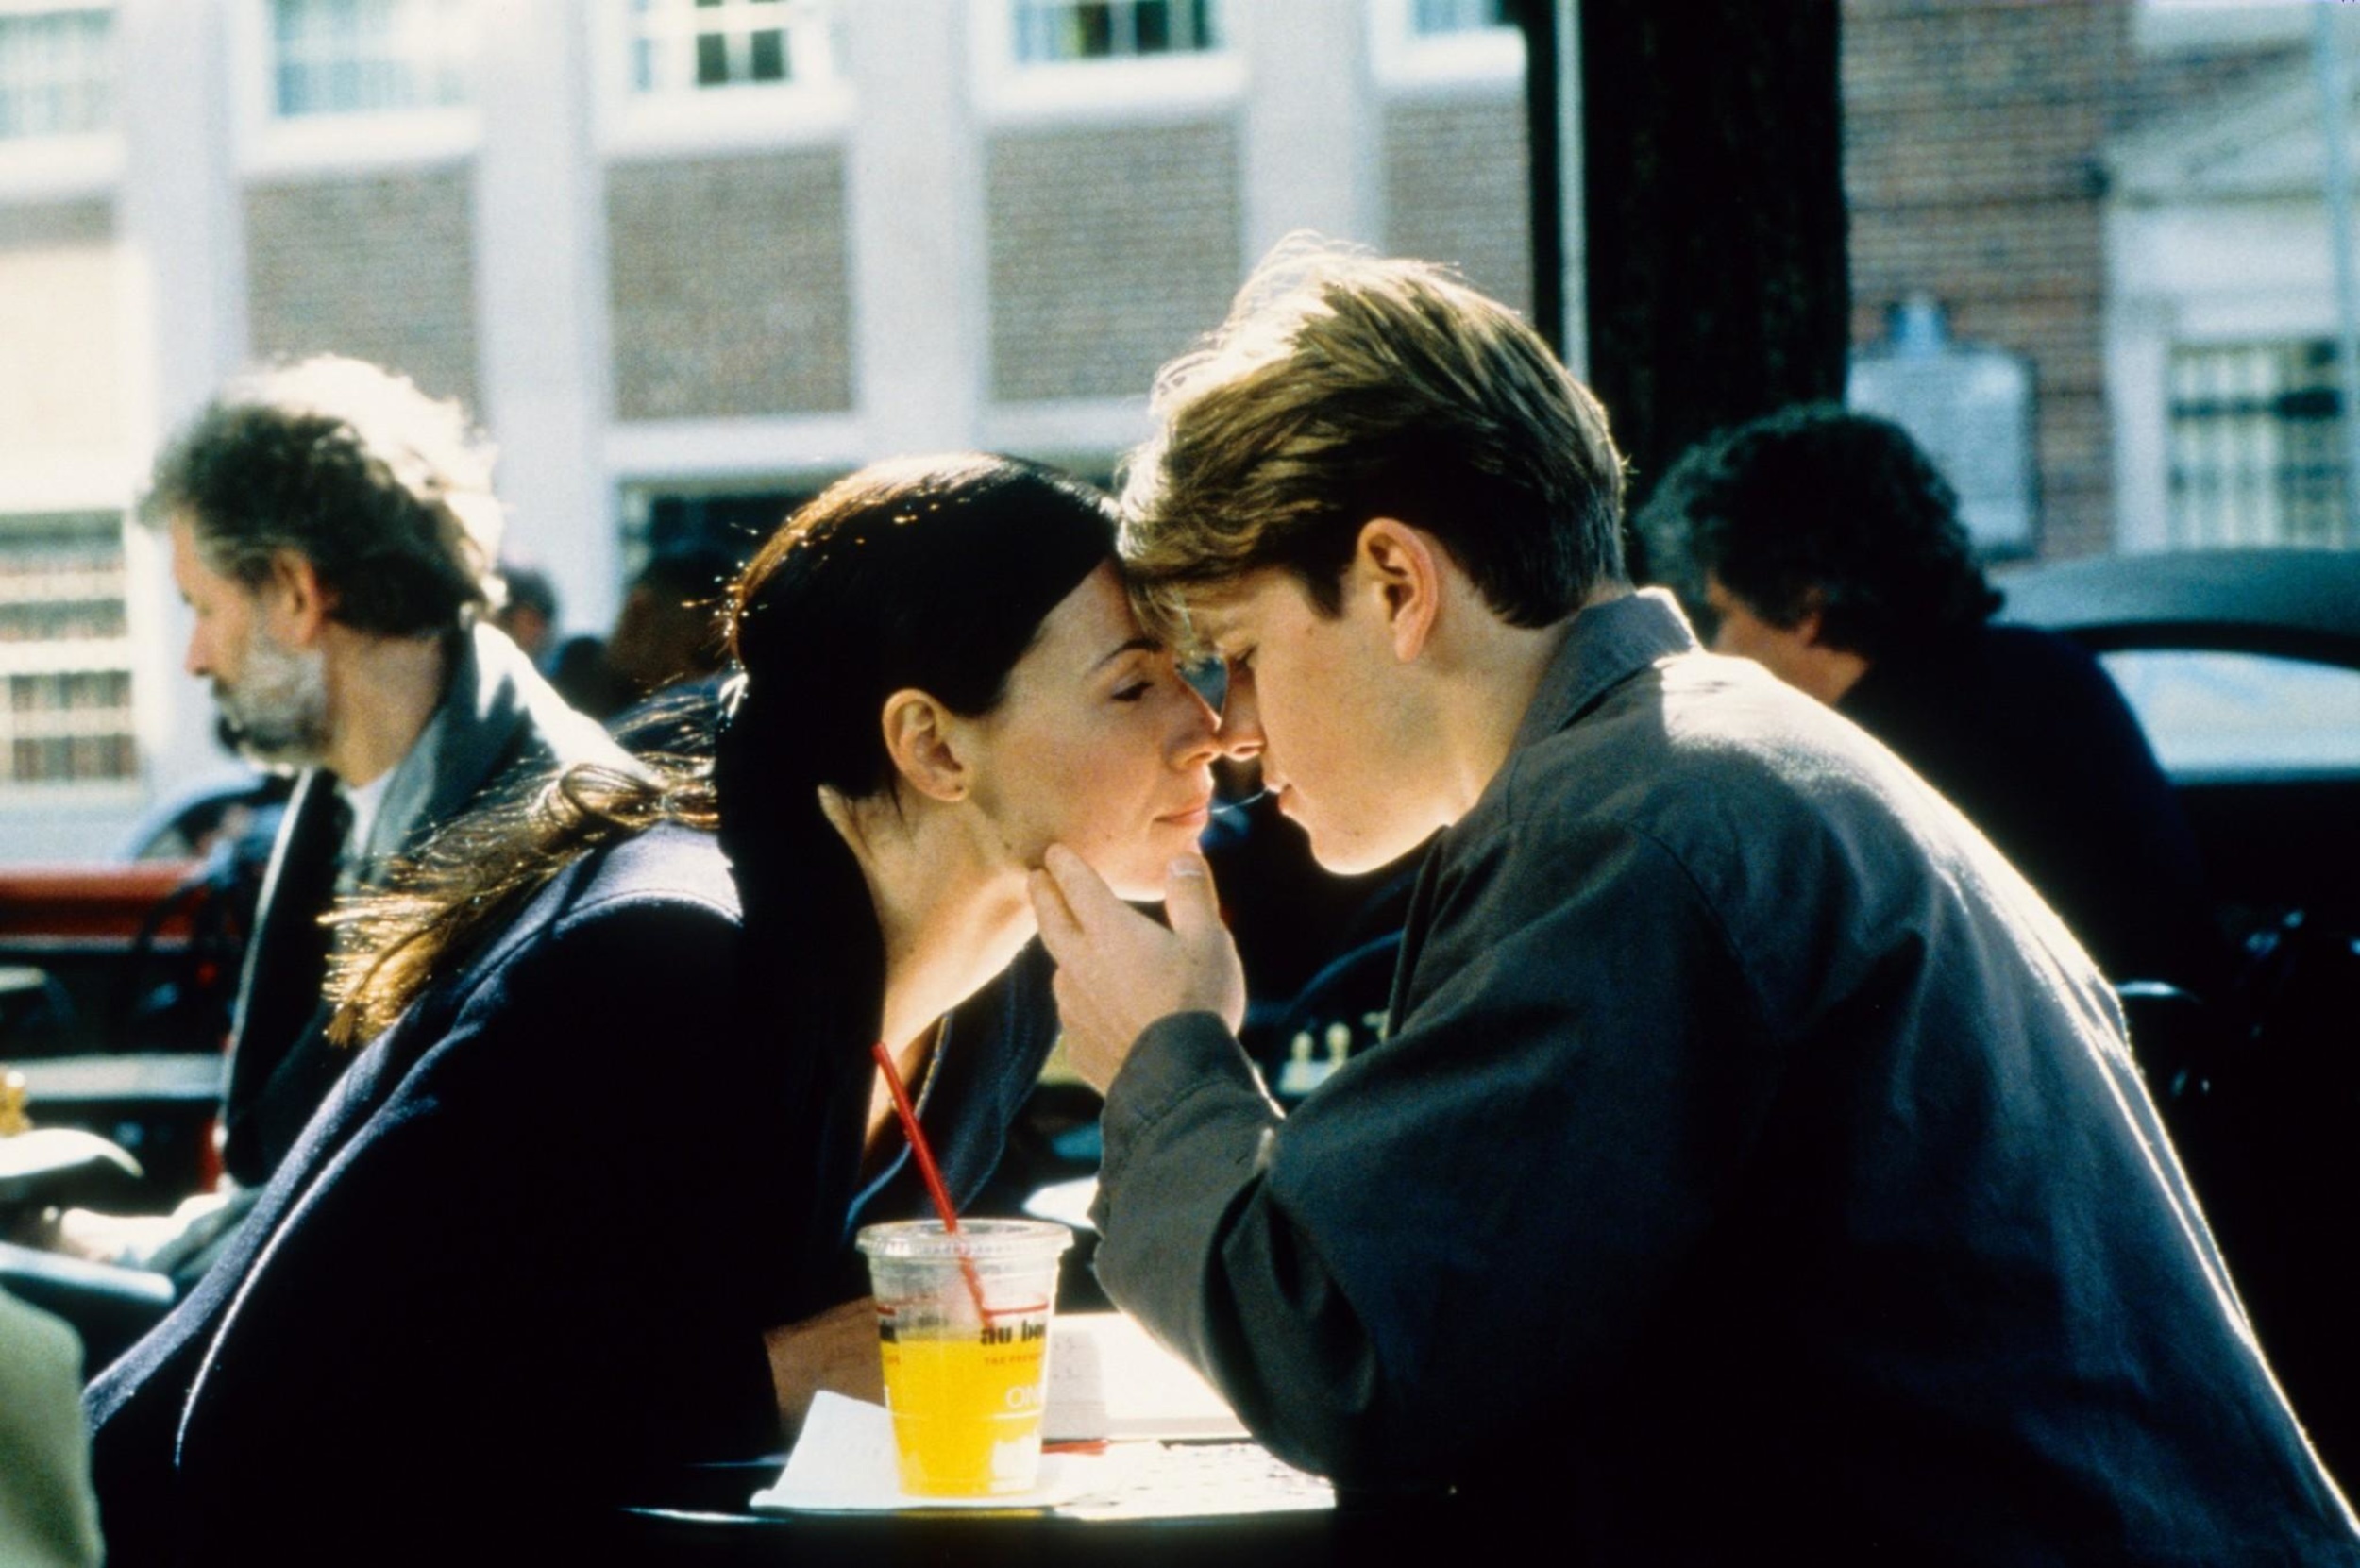 <p>The score for “Good Will Hunting” was provided by Danny Elfman. The soundtrack, though, is dominated by Elliott Smith. Several Smith songs are in the film, including “Miss Misery,” which was nominated for an Oscar. It was up against “My Heart Will Go On.” It did not win.</p>